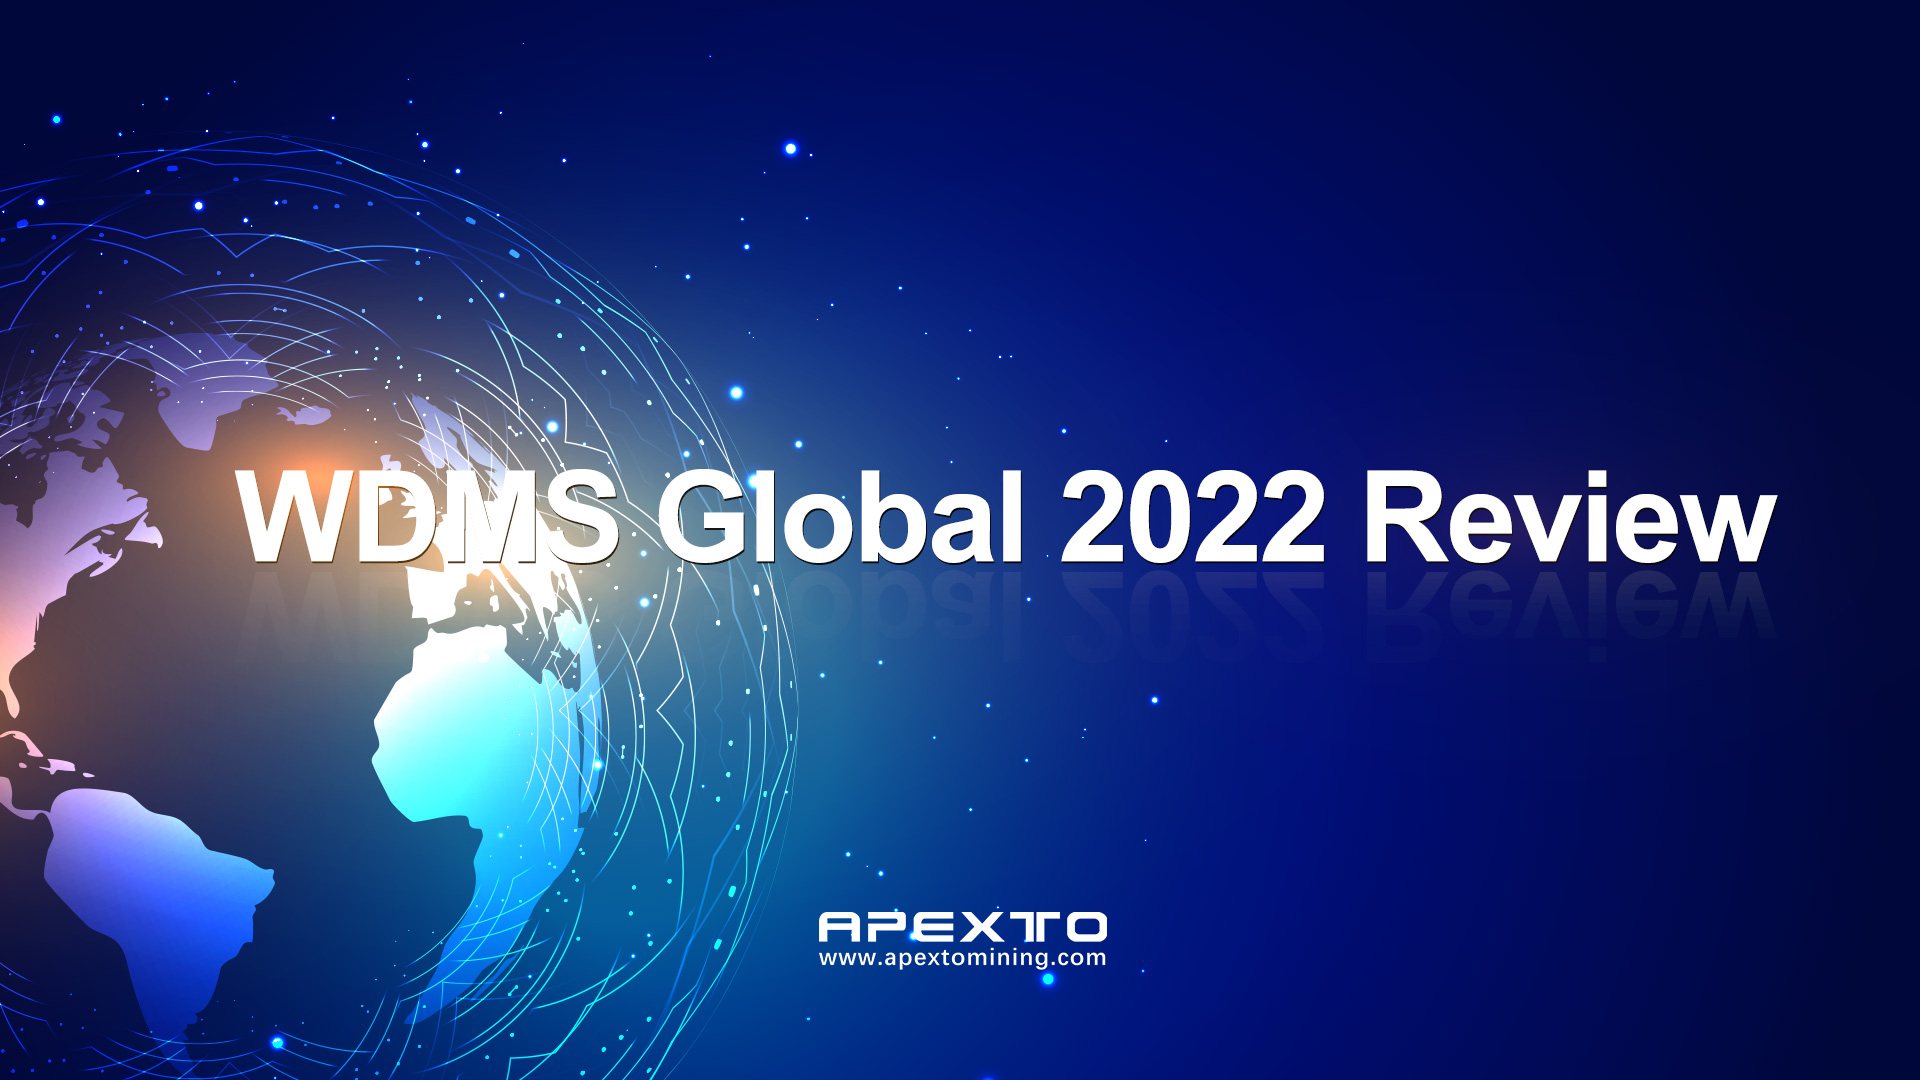 WDMS Global 2022 to be held in Cancun, attracting industry experts and leaders